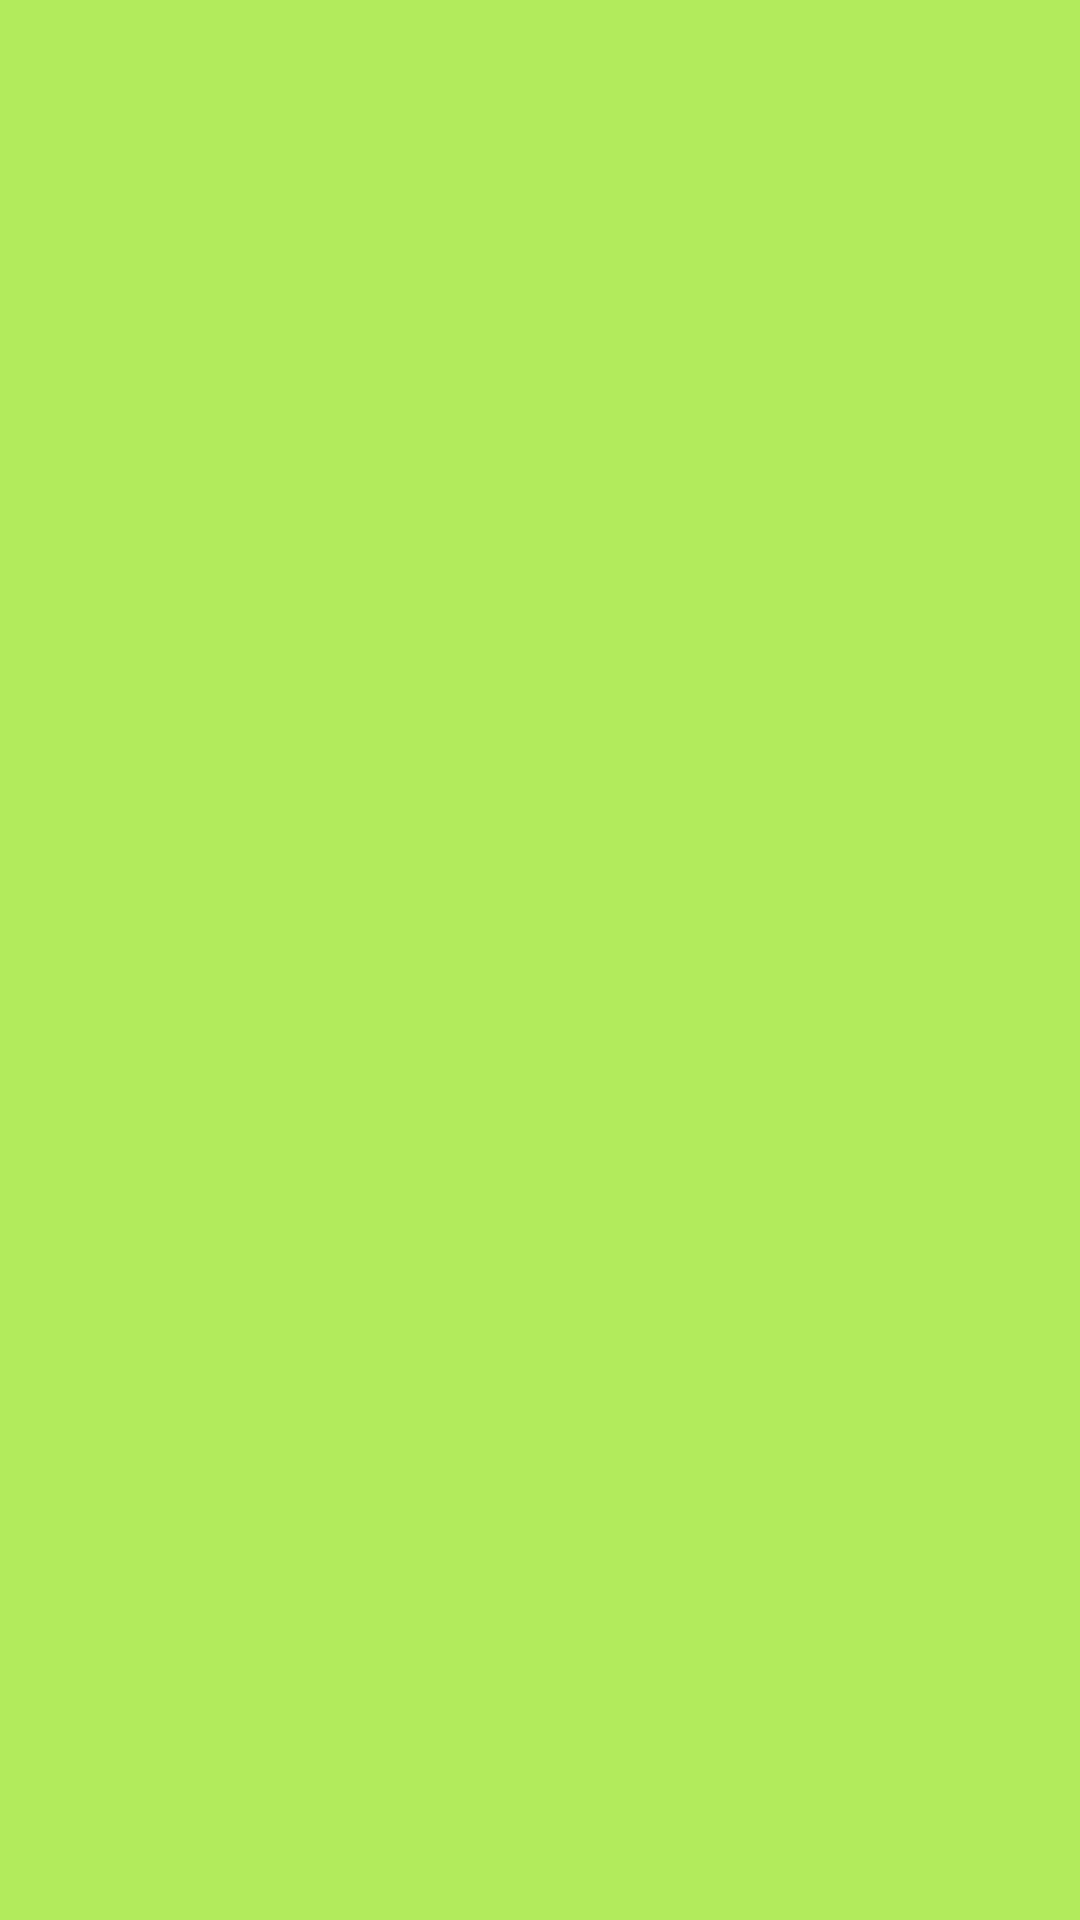 1080x1920 Inchworm Solid Color Background